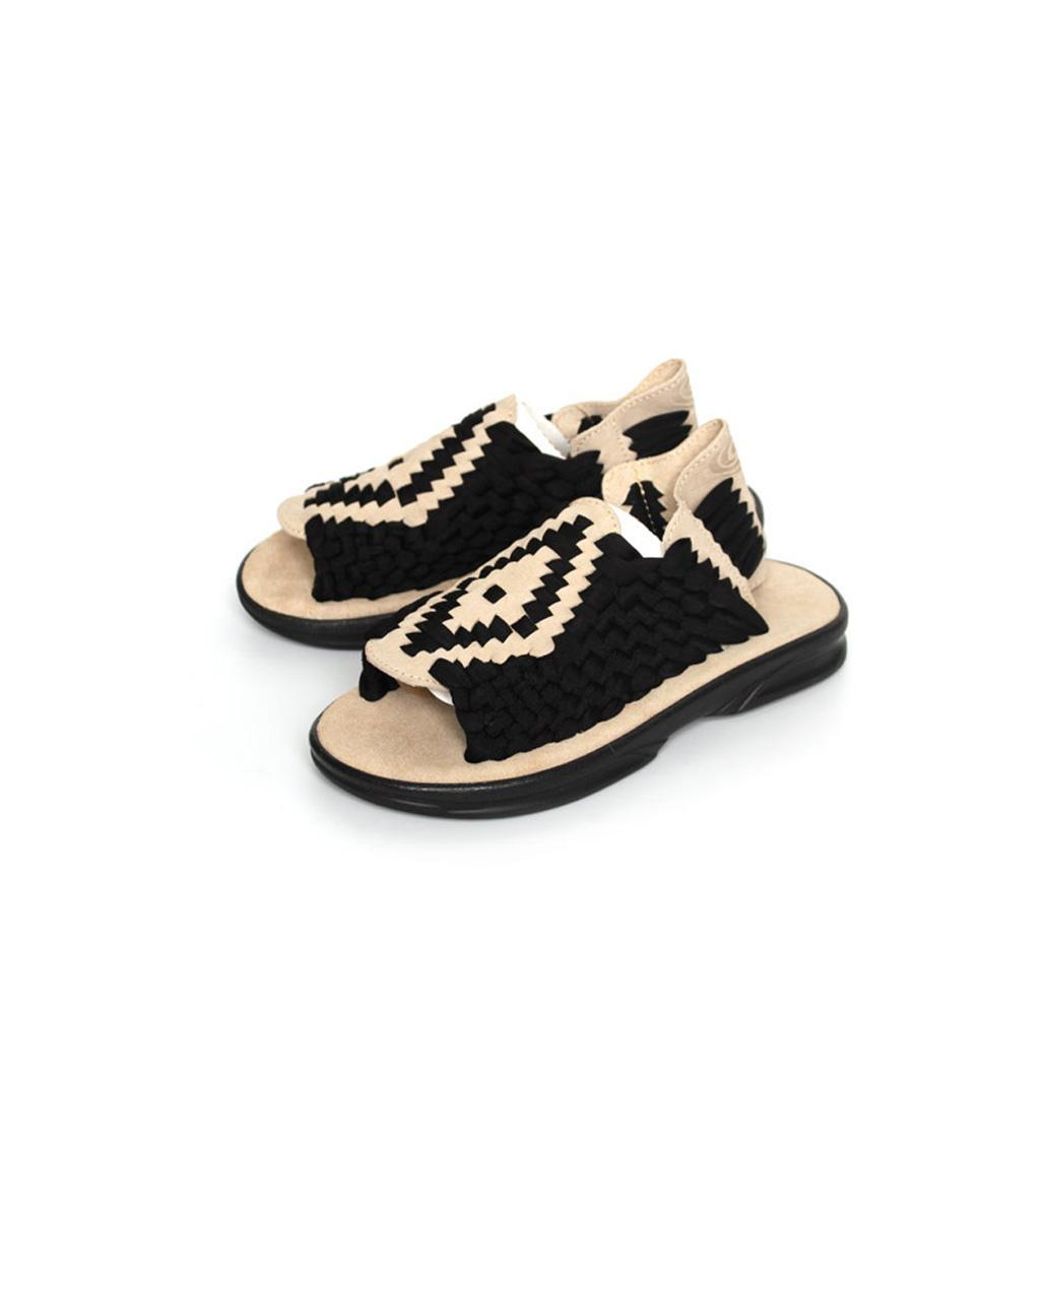 Chubasco Synthetic Aztec Sandals Sand Sand A00061 in Black - Lyst